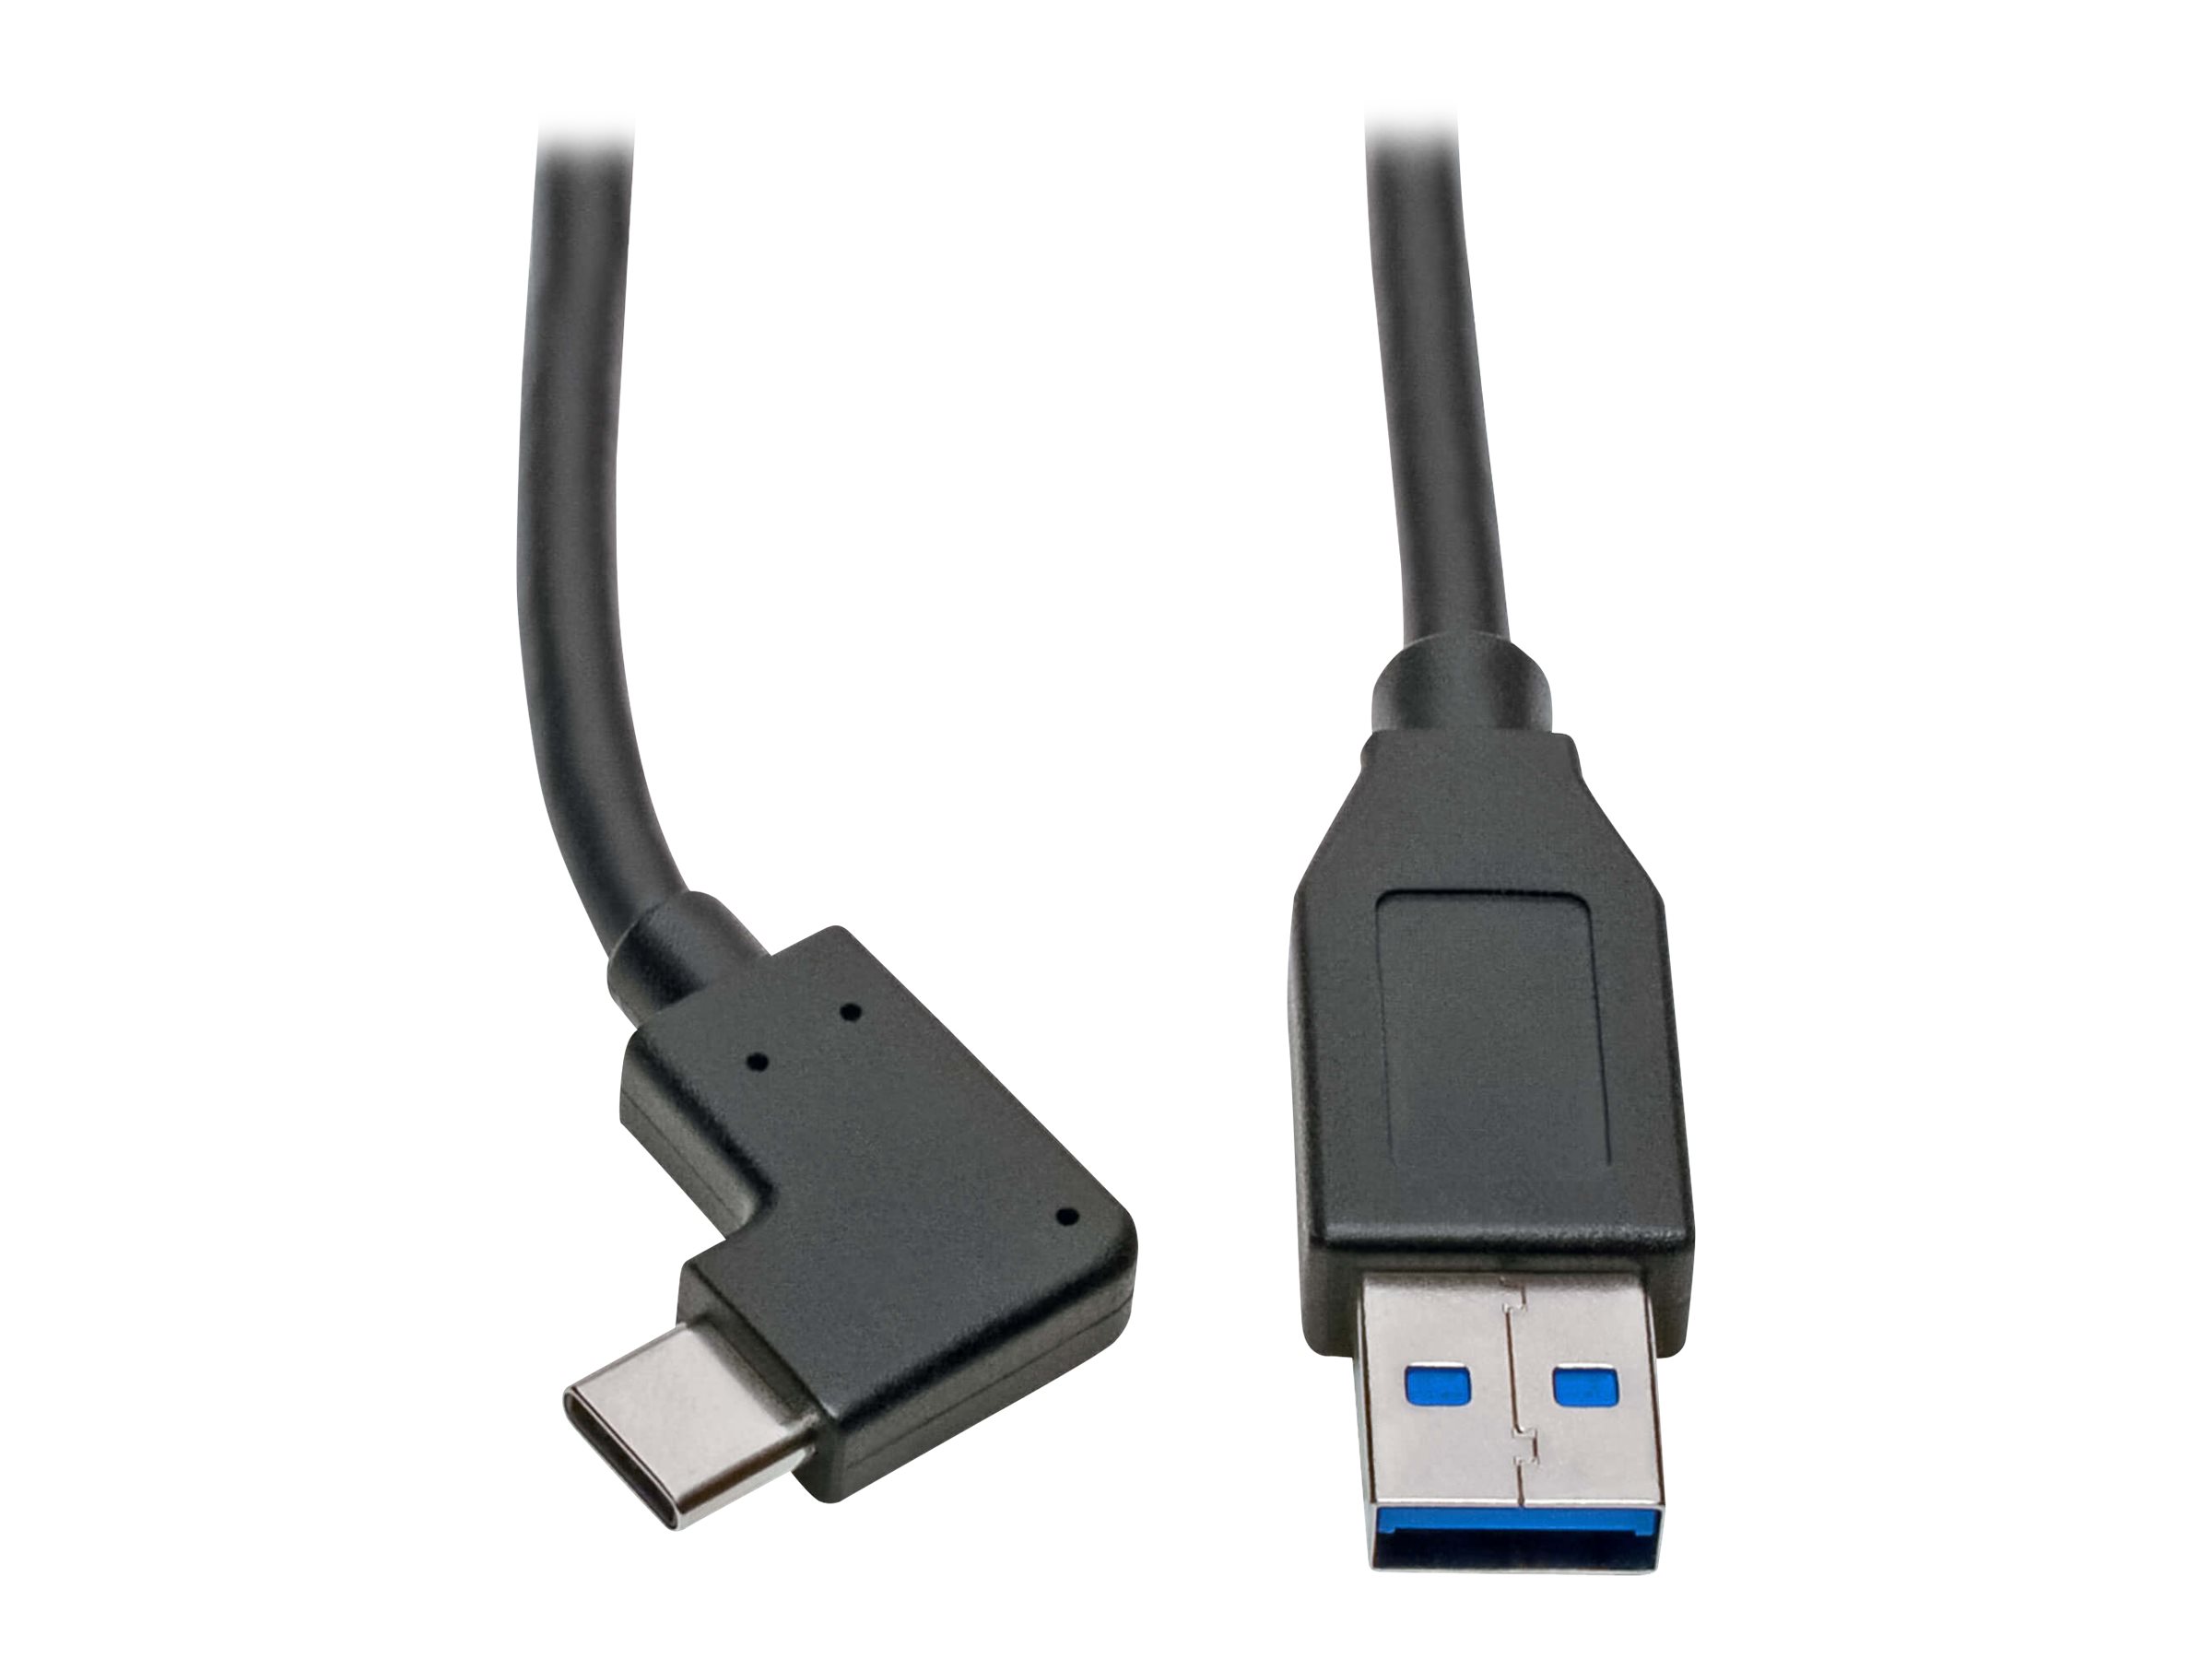 Eaton Tripp Lite Series USB-C to USB-A Cable (M/M), Right-Angle C, USB 3.2 Gen 1 (5 Gbps), Thunderbolt 3 Compatible, 3 ft. (0.91